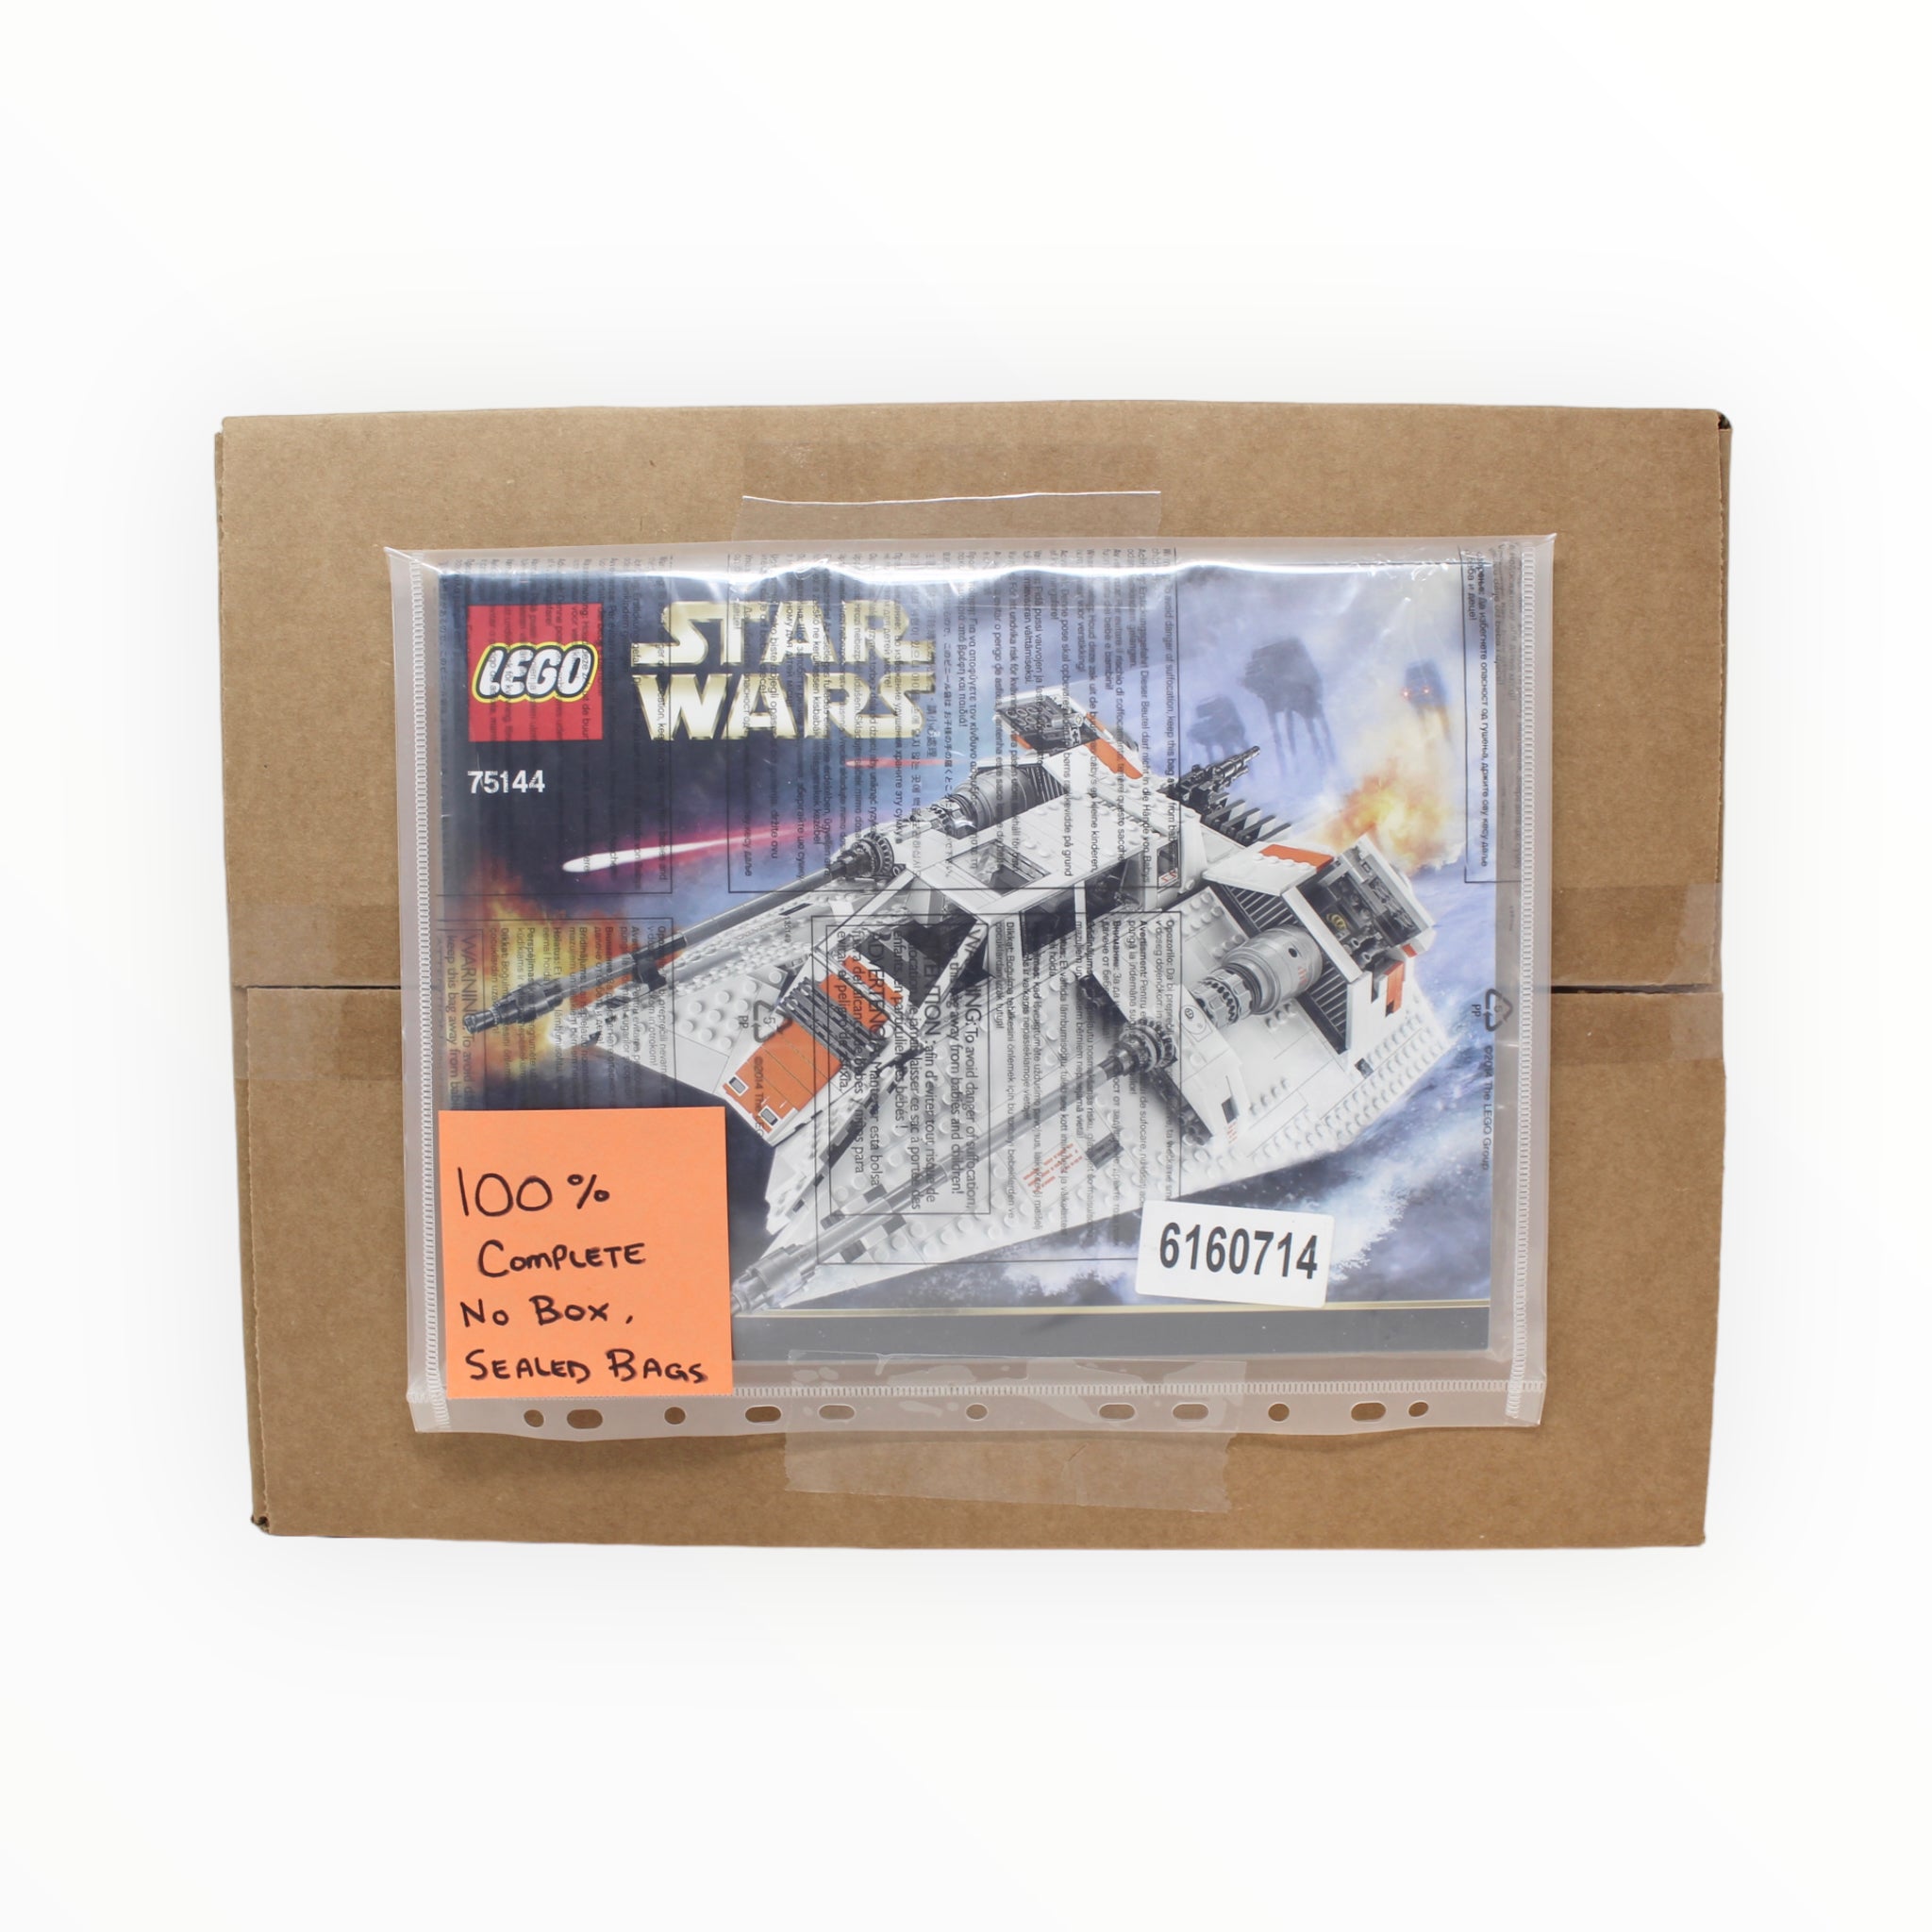 Certified Used Set 75144 Star Wars UCS Snowspeeder (2nd Edition, 2017, no box, sealed bags)